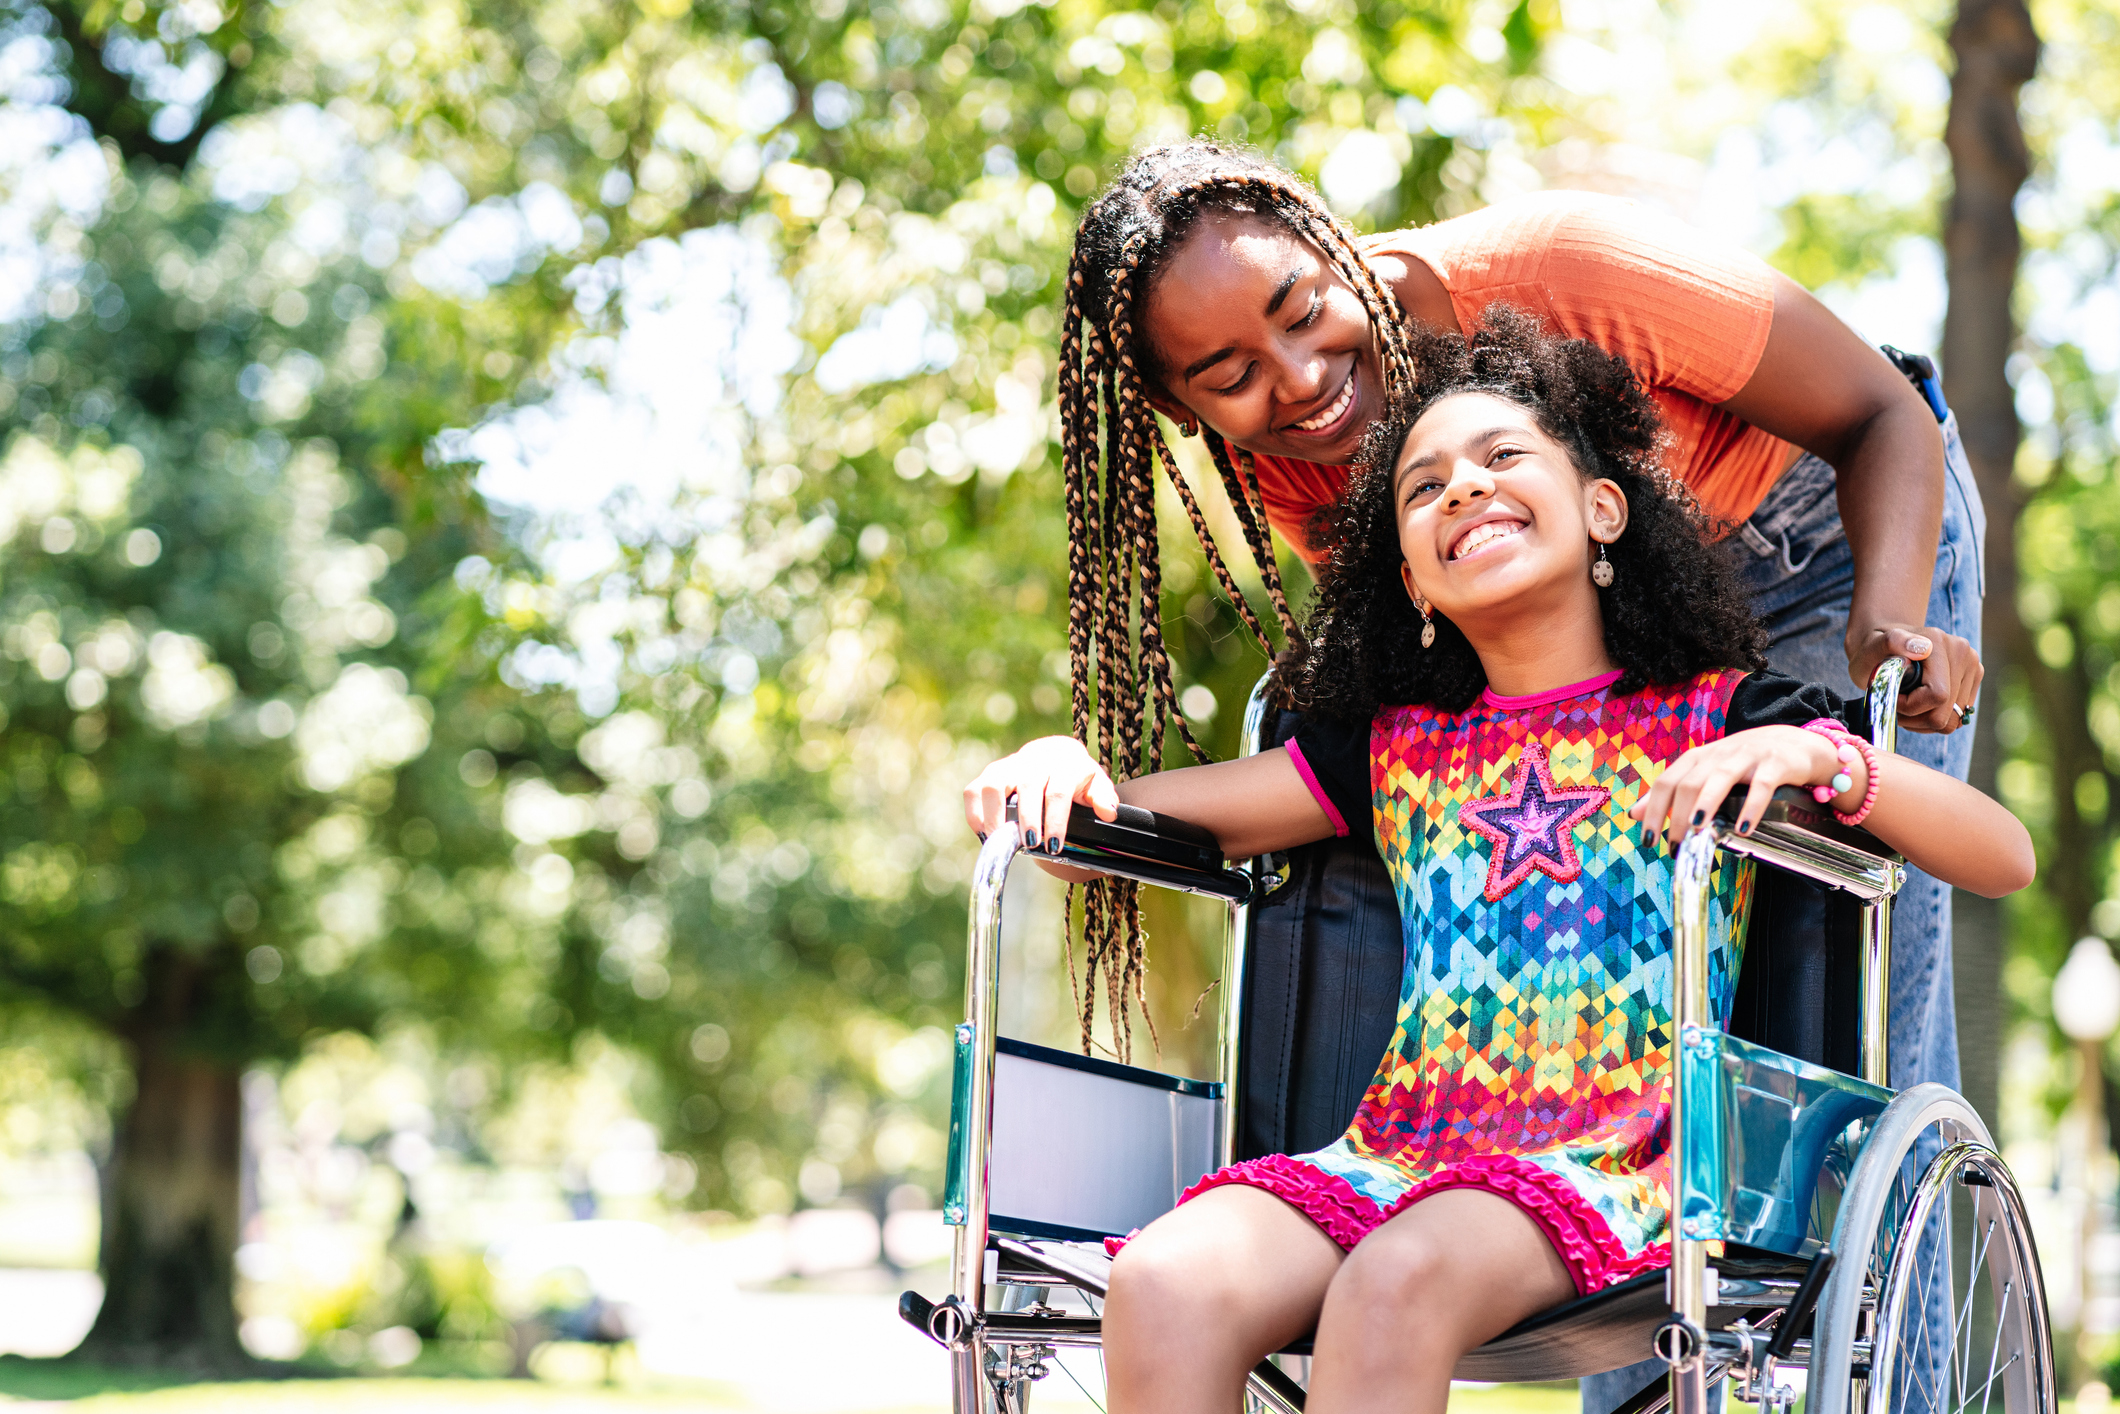 11 Tips for Hiring Caregivers for Your Special Needs Child - FamilyEducation